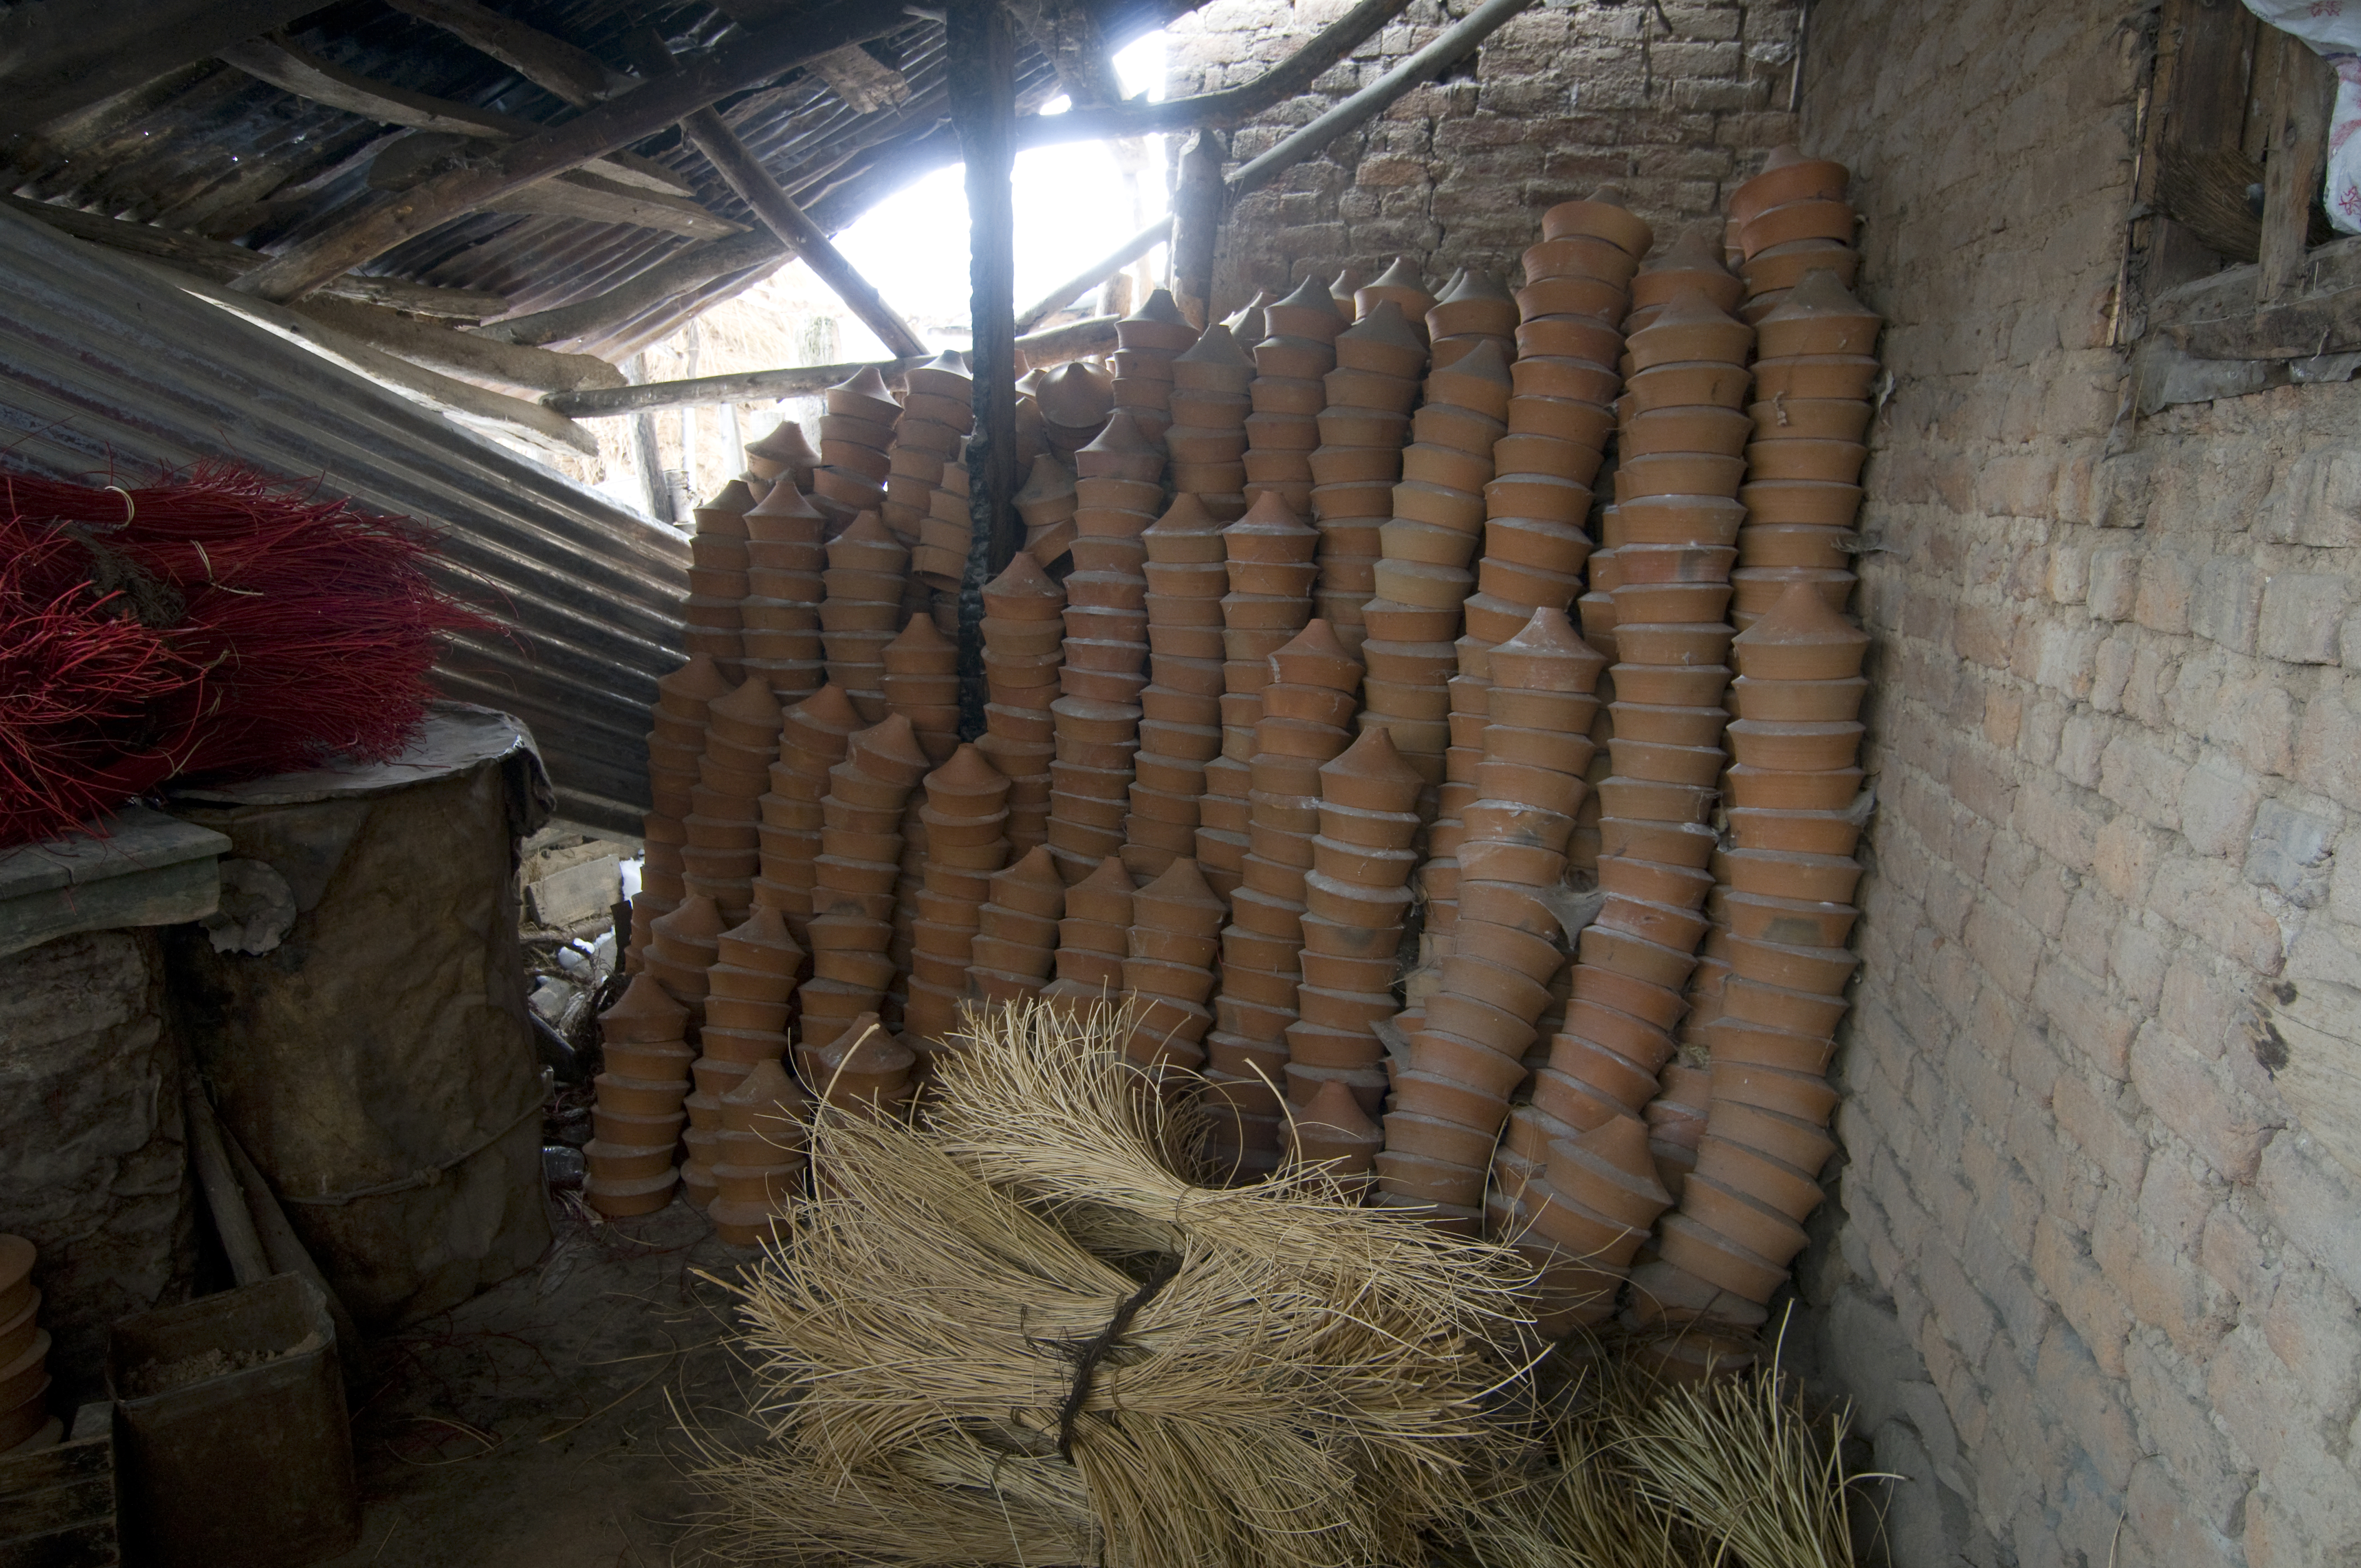 Earthenware kangdi pots stacked in the backroom of a Kashmir home (photo: Sugato Mukherjee)